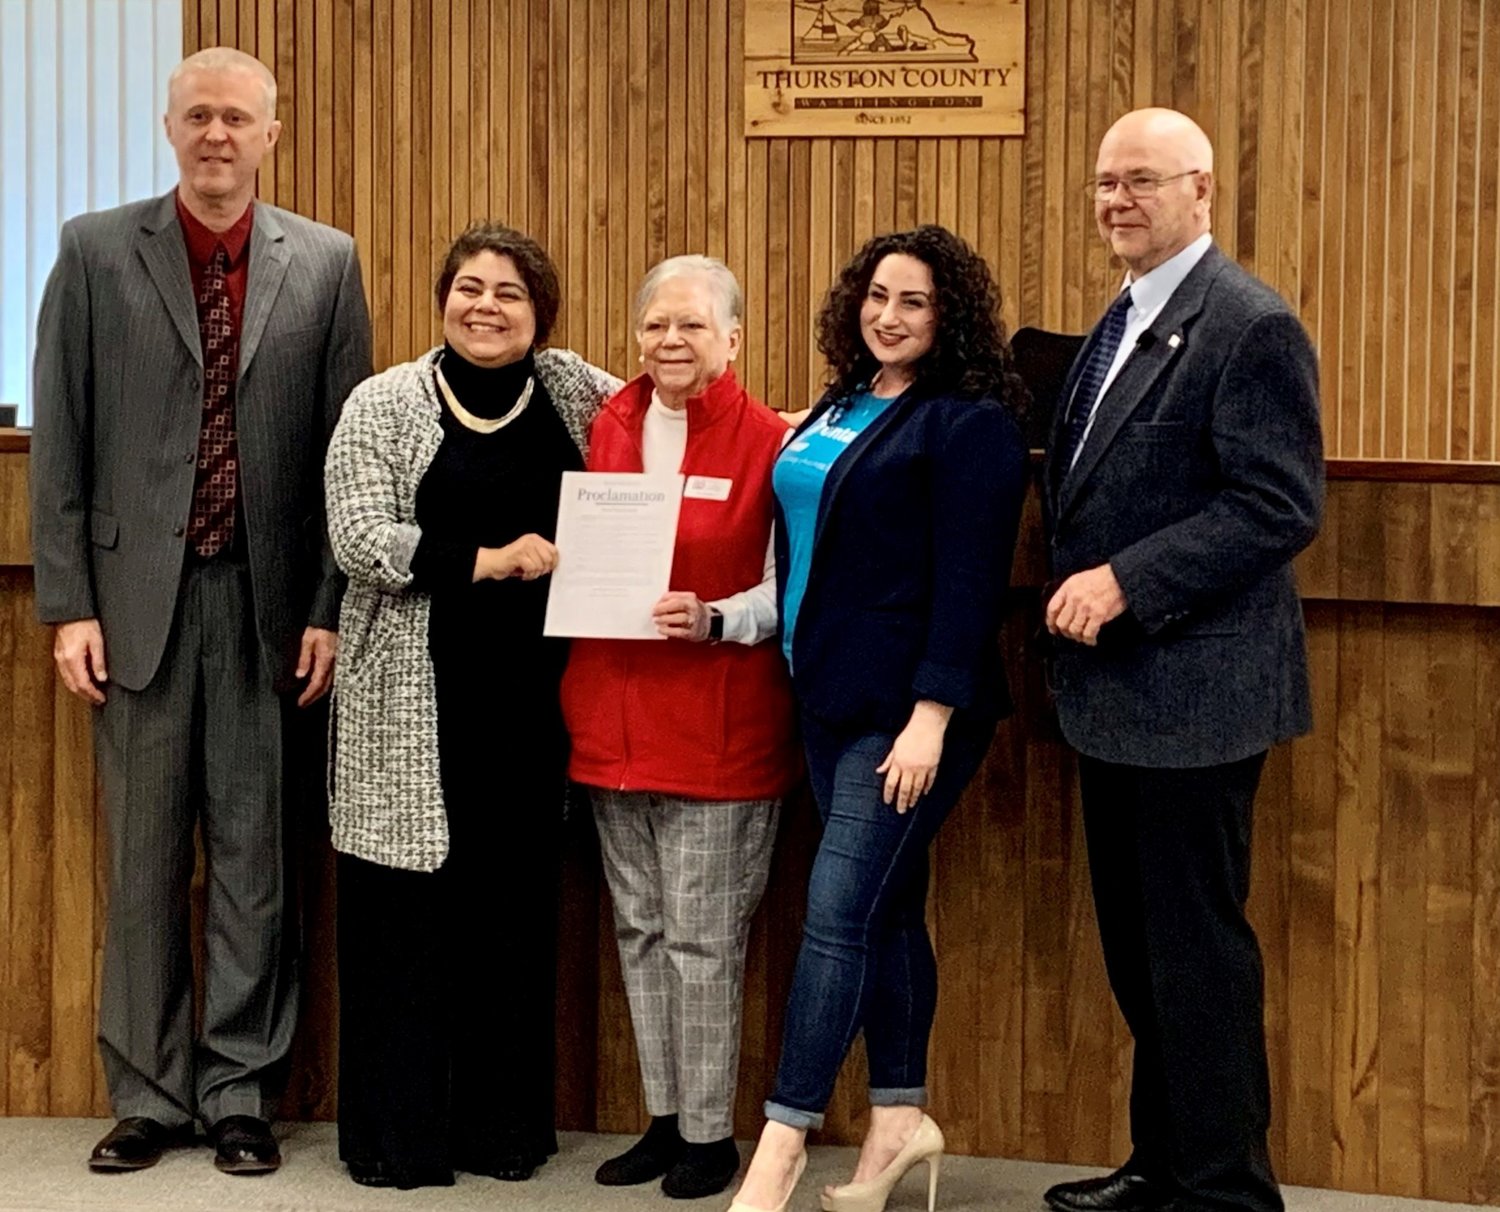 L-r: Thurston County Commissioners Tye Menser, Carolina Mejia, Zonta Club of Olympia representatives Pamela Dittloff and Lynda Nashed Zeman, and Commissioner Gary Edwards pose with Thurston Board of County Commissioners’ proclamation of Women’s History Month on March 22, 2022.